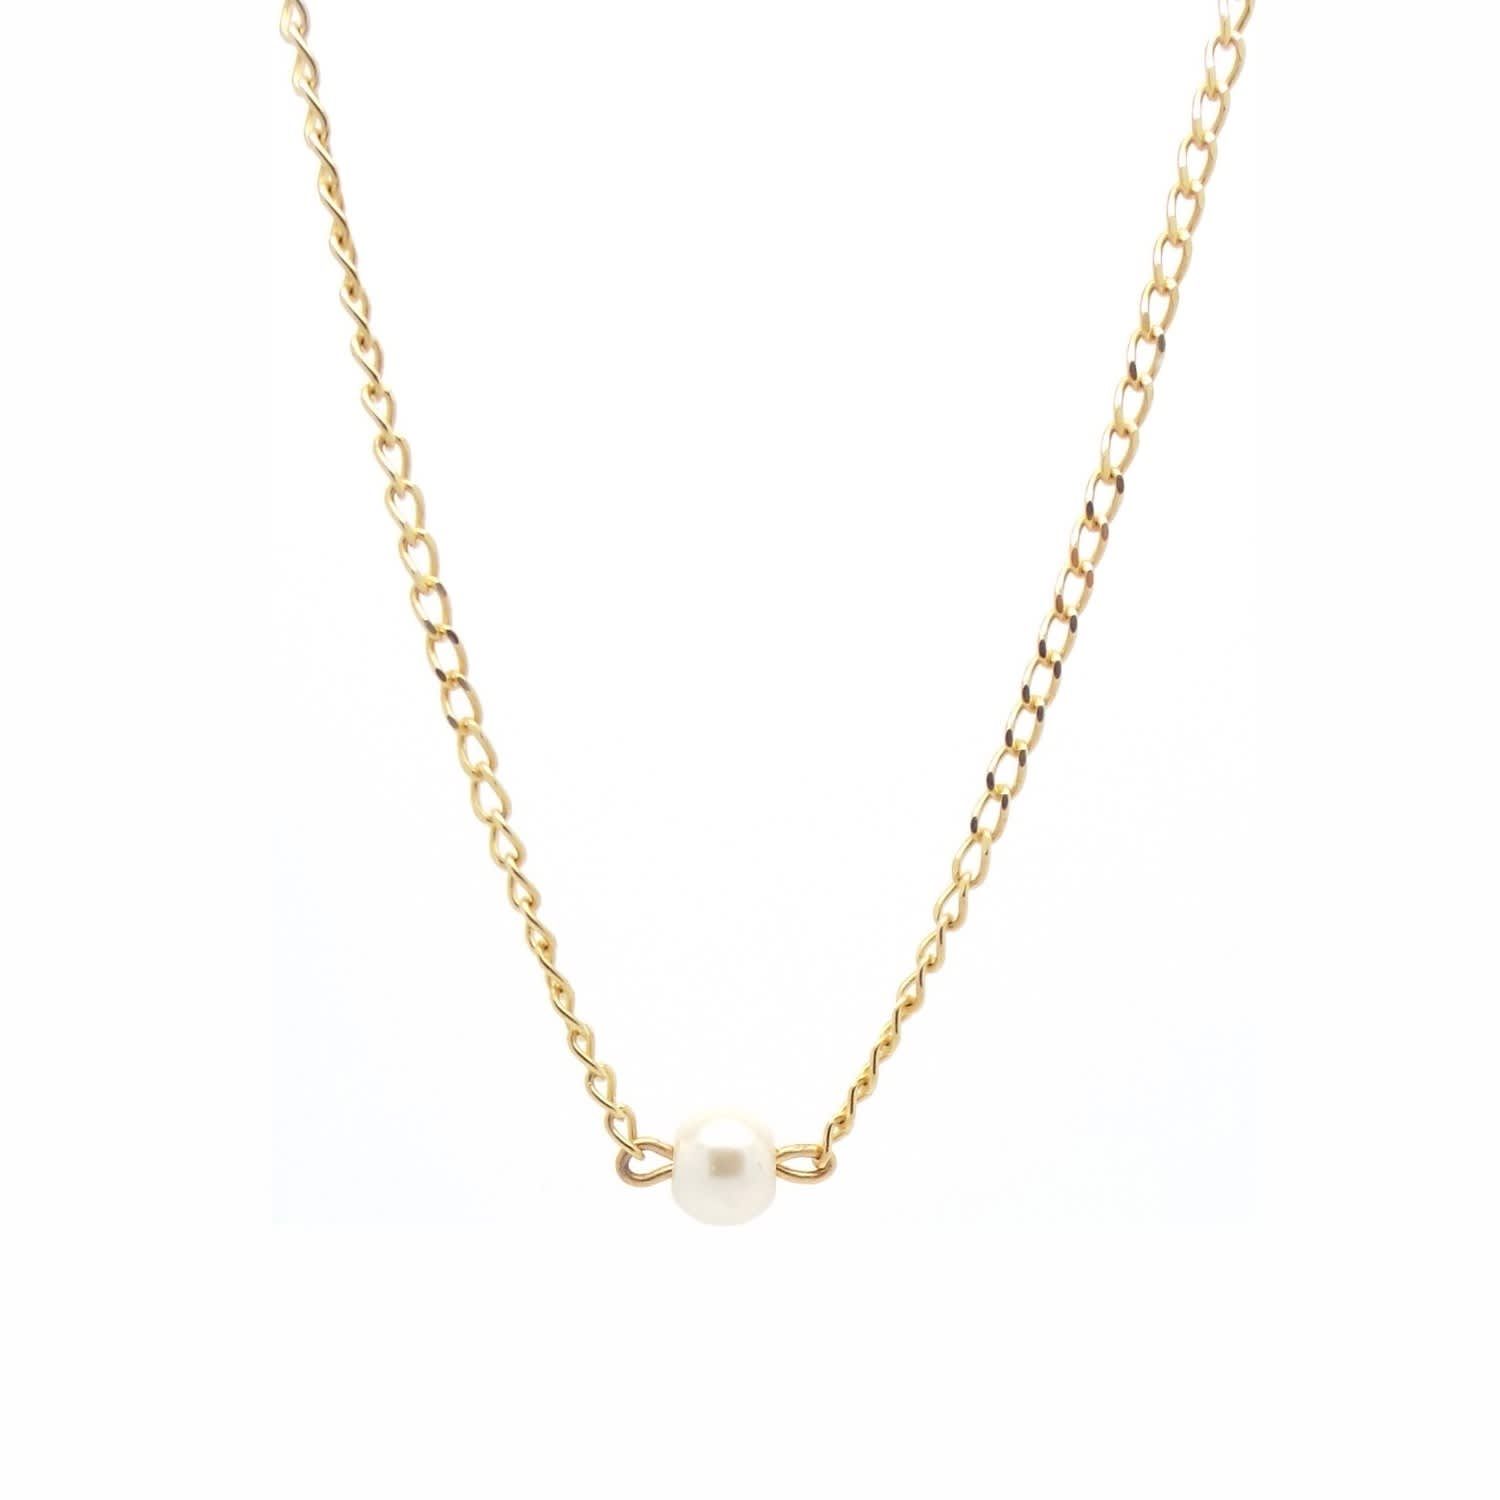 Salome X Stephanie Waxberg Pearl Necklace by SALOME | Wolf and Badger (Global excl. US)